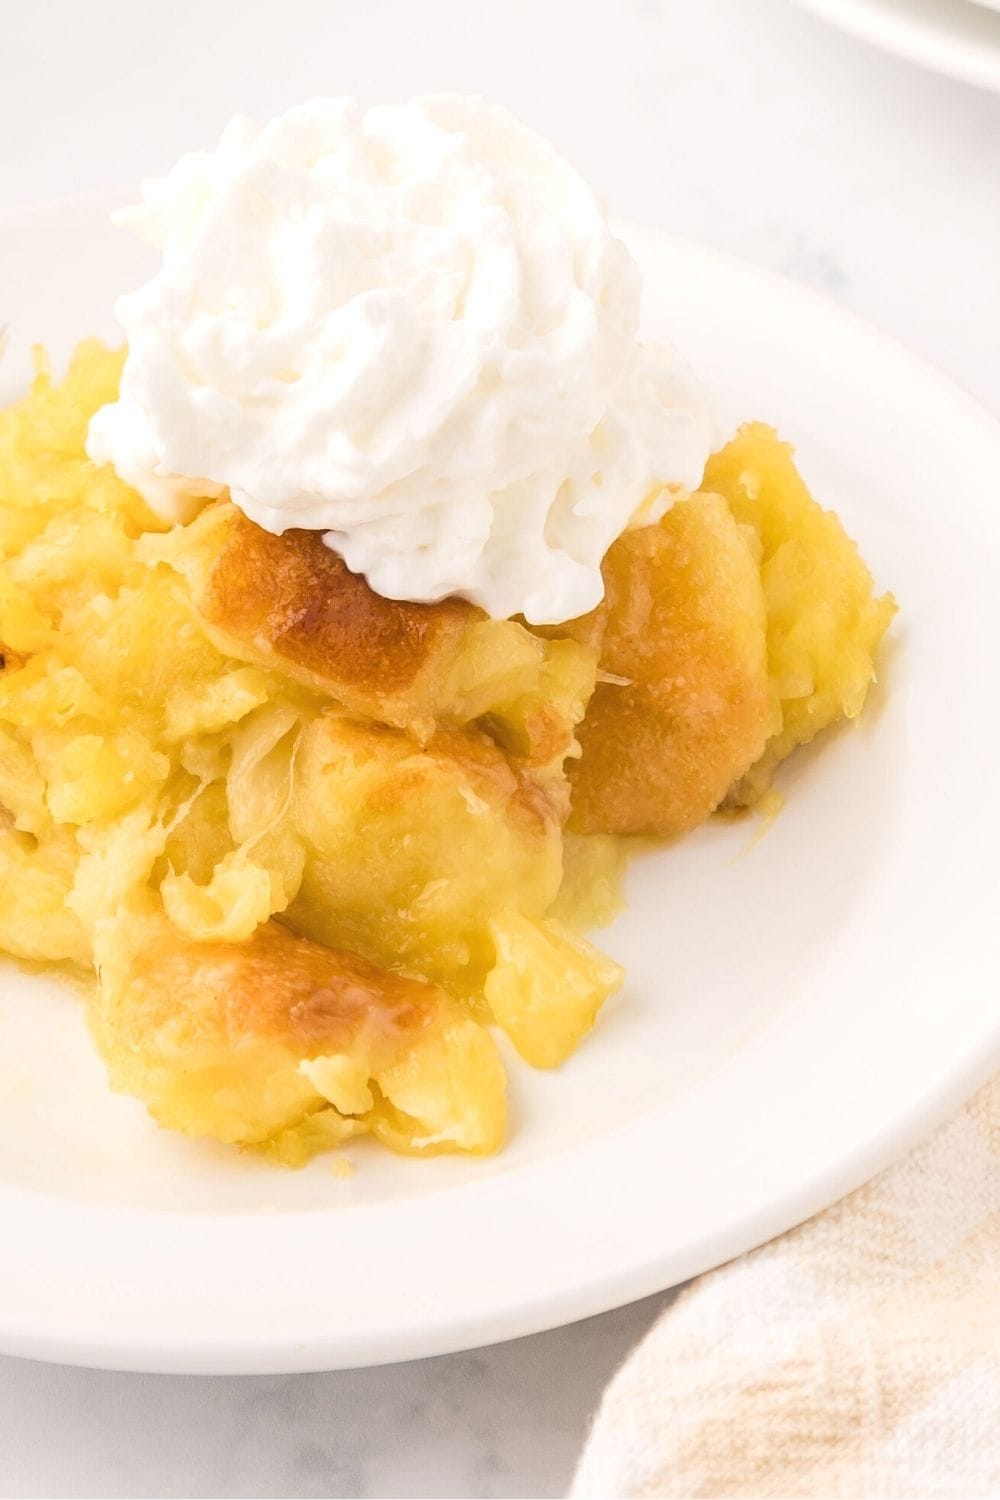 scalloped pineapple stuffing served with a dollop of whipped cream, as a sweet side dish for ham or an easy dessert